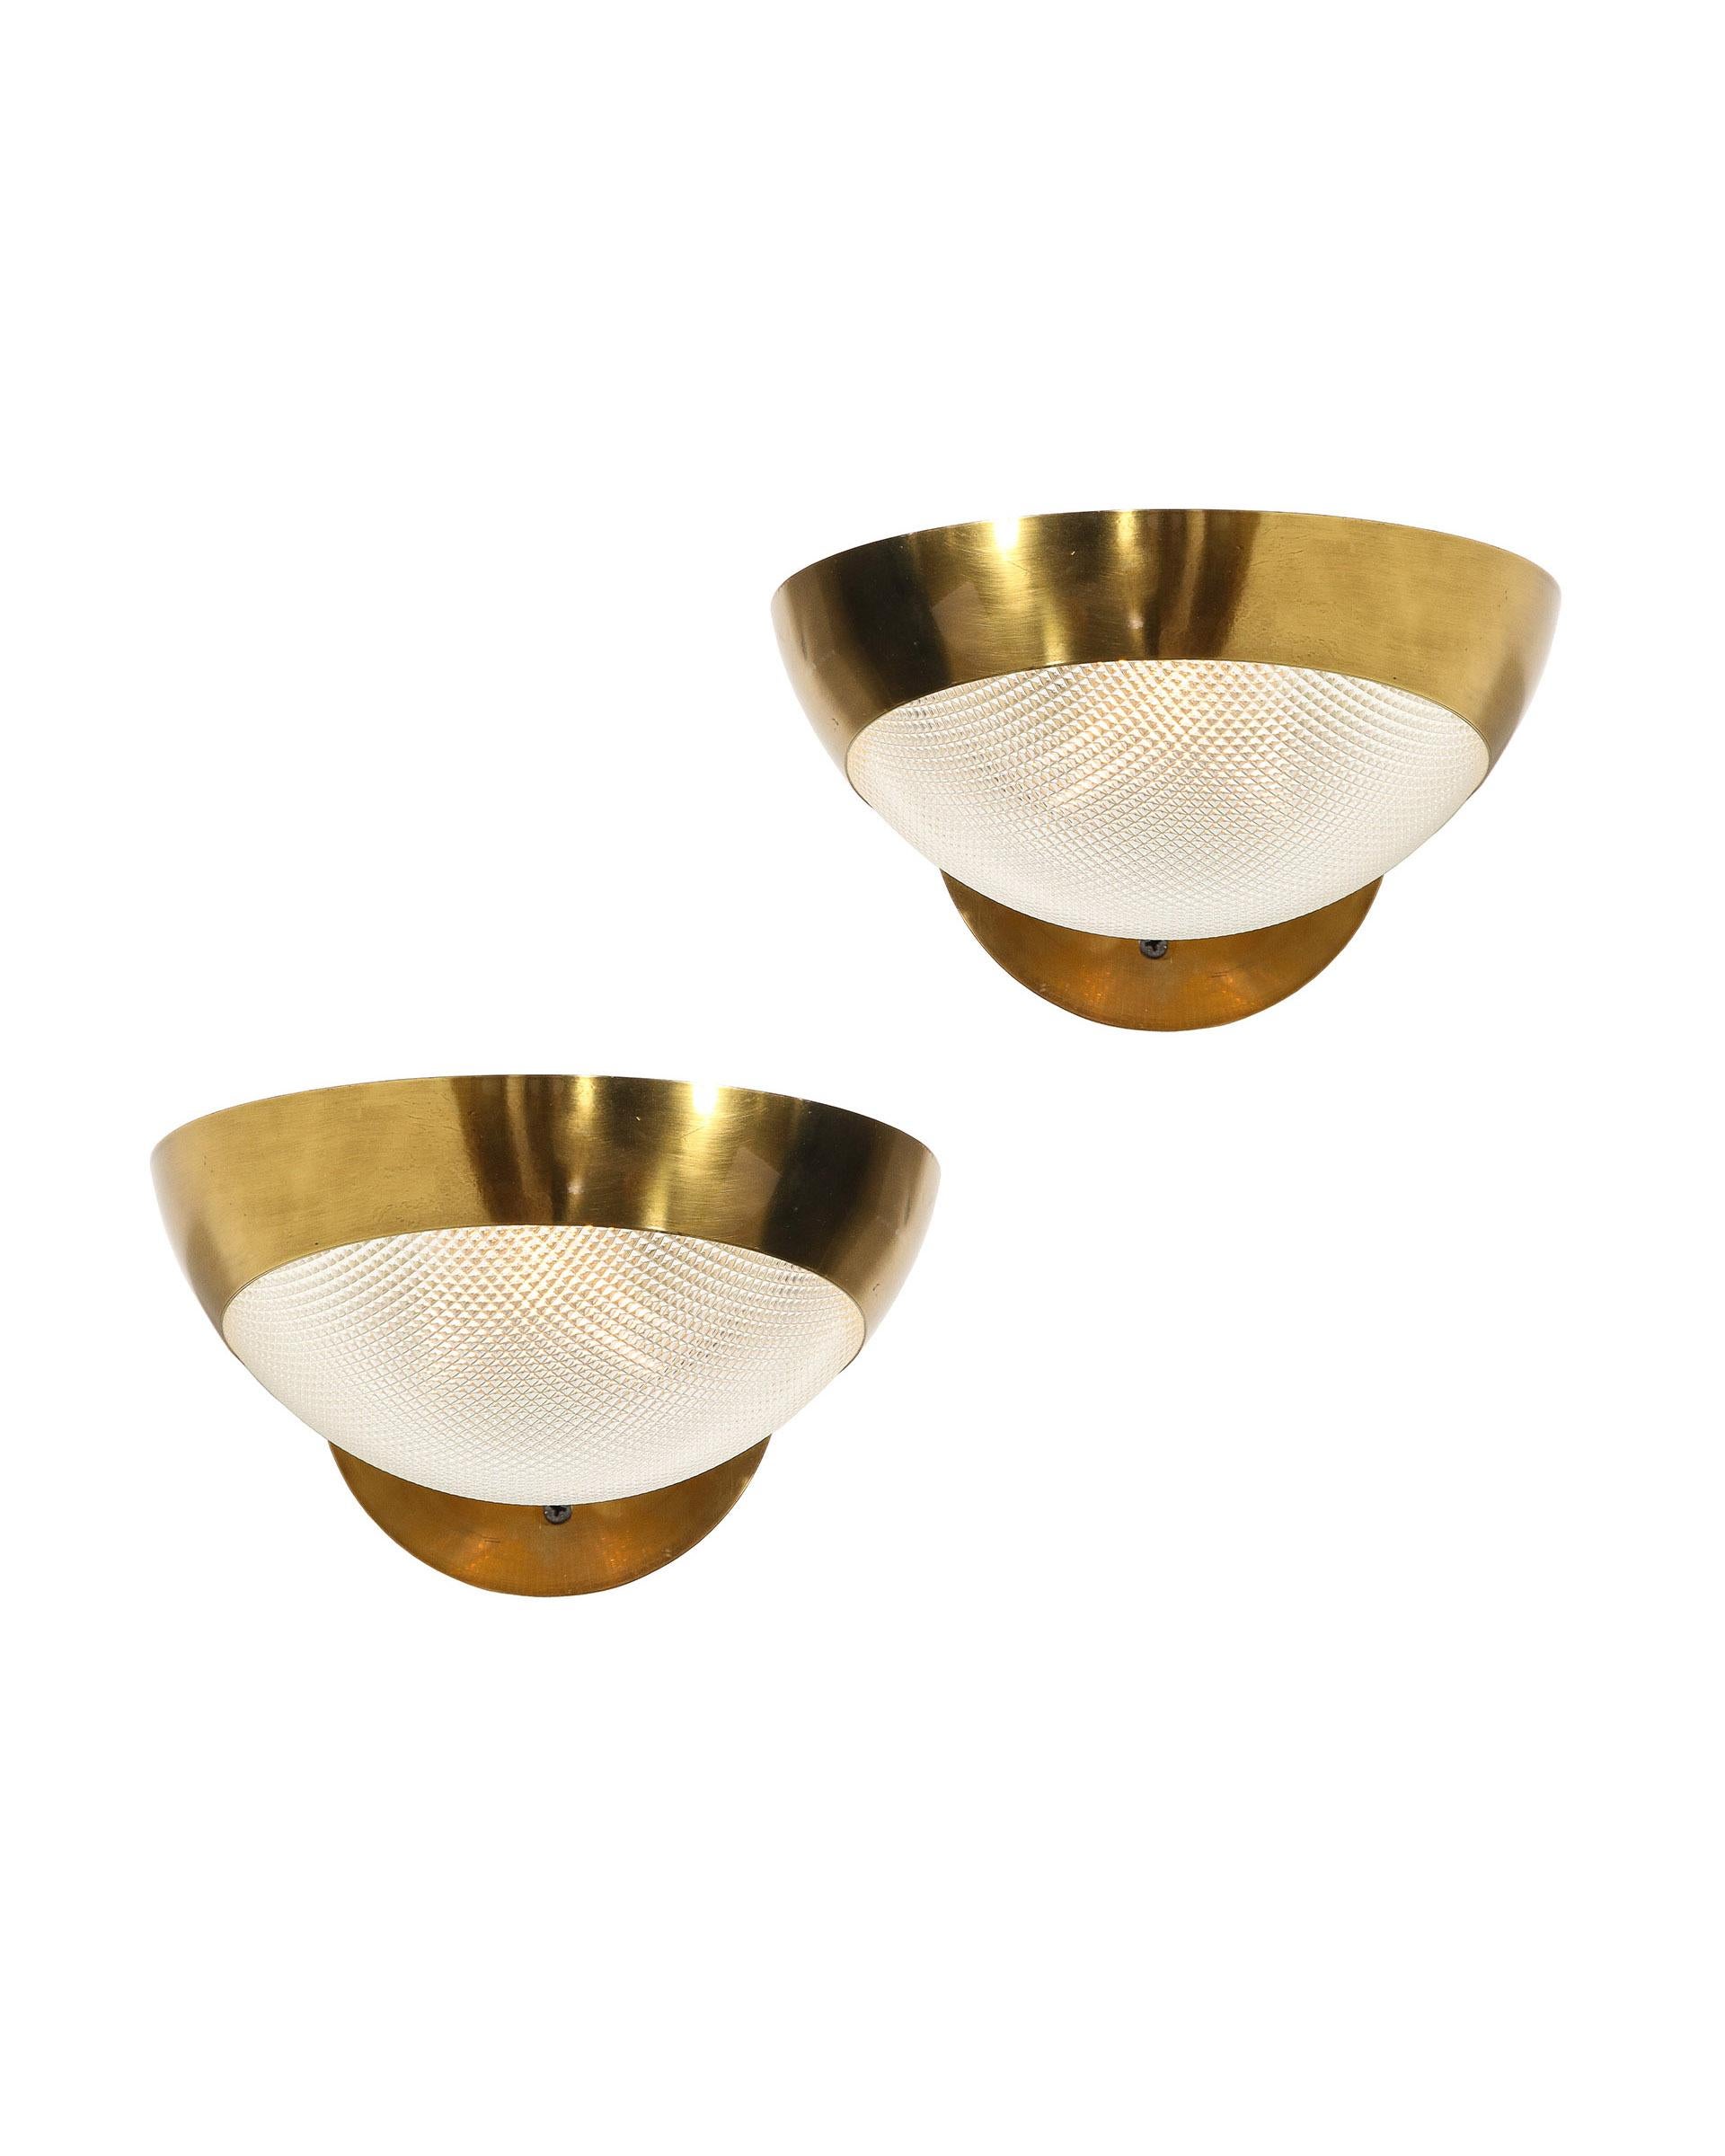 20th Century Pair of Wall Lights by Stilnovo For Sale